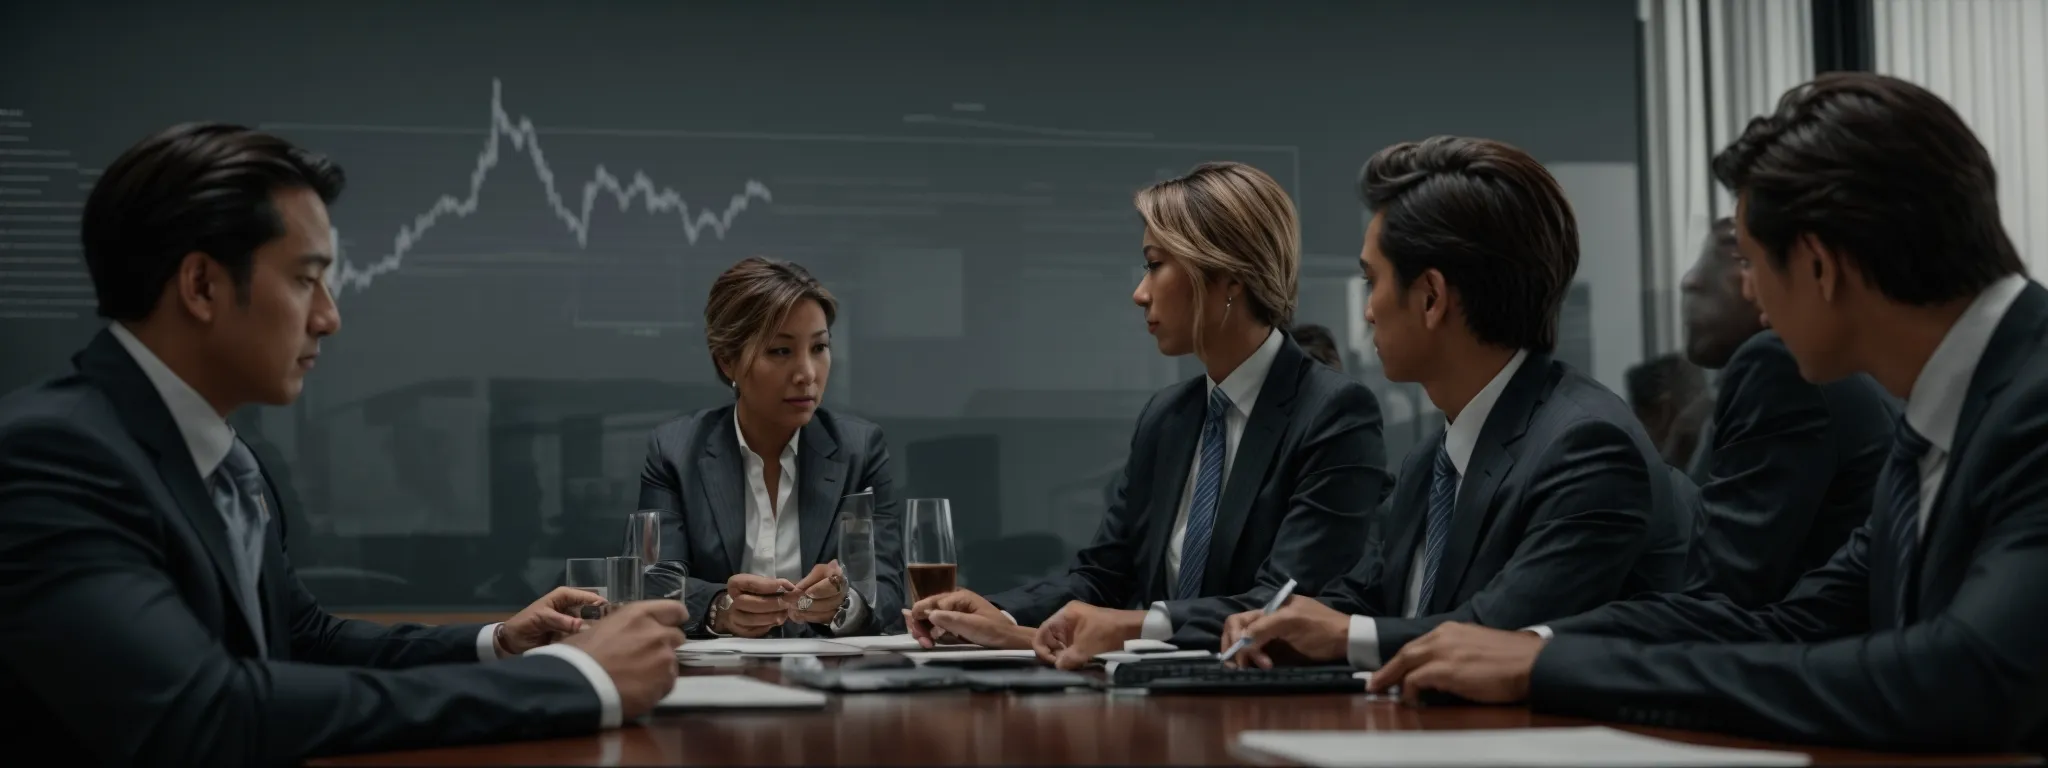 a group of executives analyzing a large graph chart during a boardroom meeting.